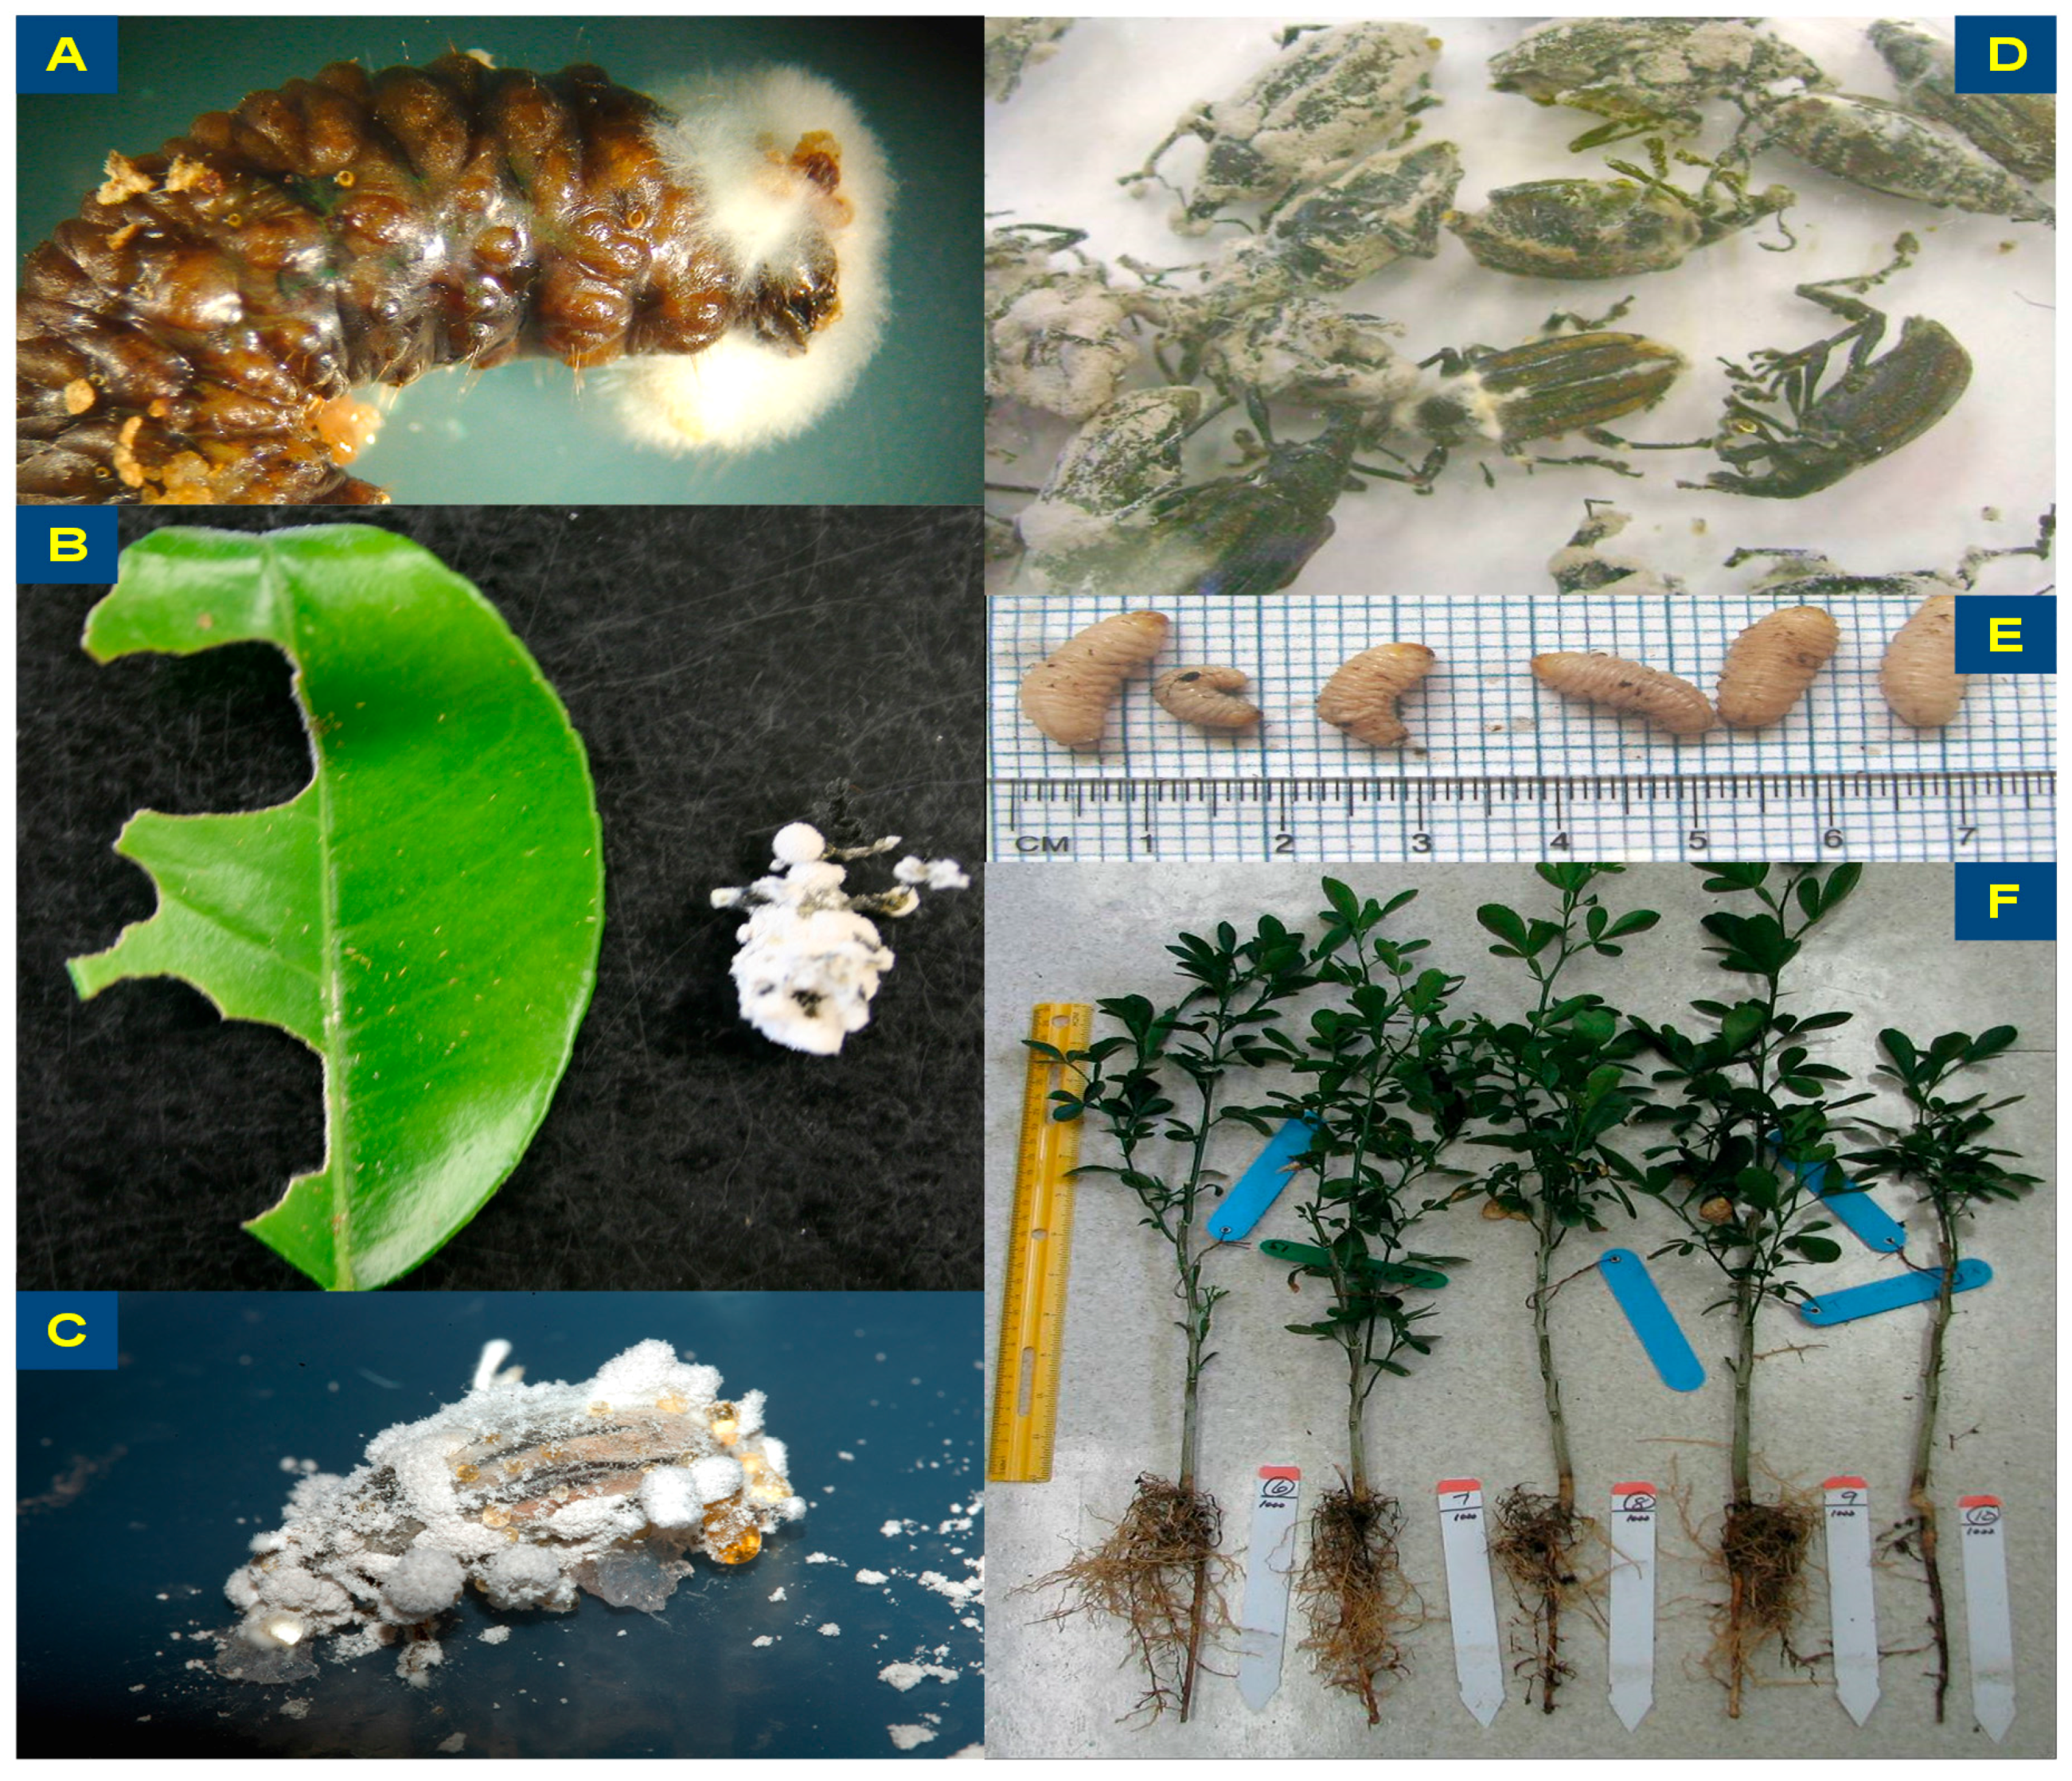 Insects | Free Full-Text | Efficacy of Topical Application, Leaf Residue or  Soil Drench of Blastospores of Isaria fumosorosea for Citrus Root Weevil  Management: Laboratory and Greenhouse Investigations